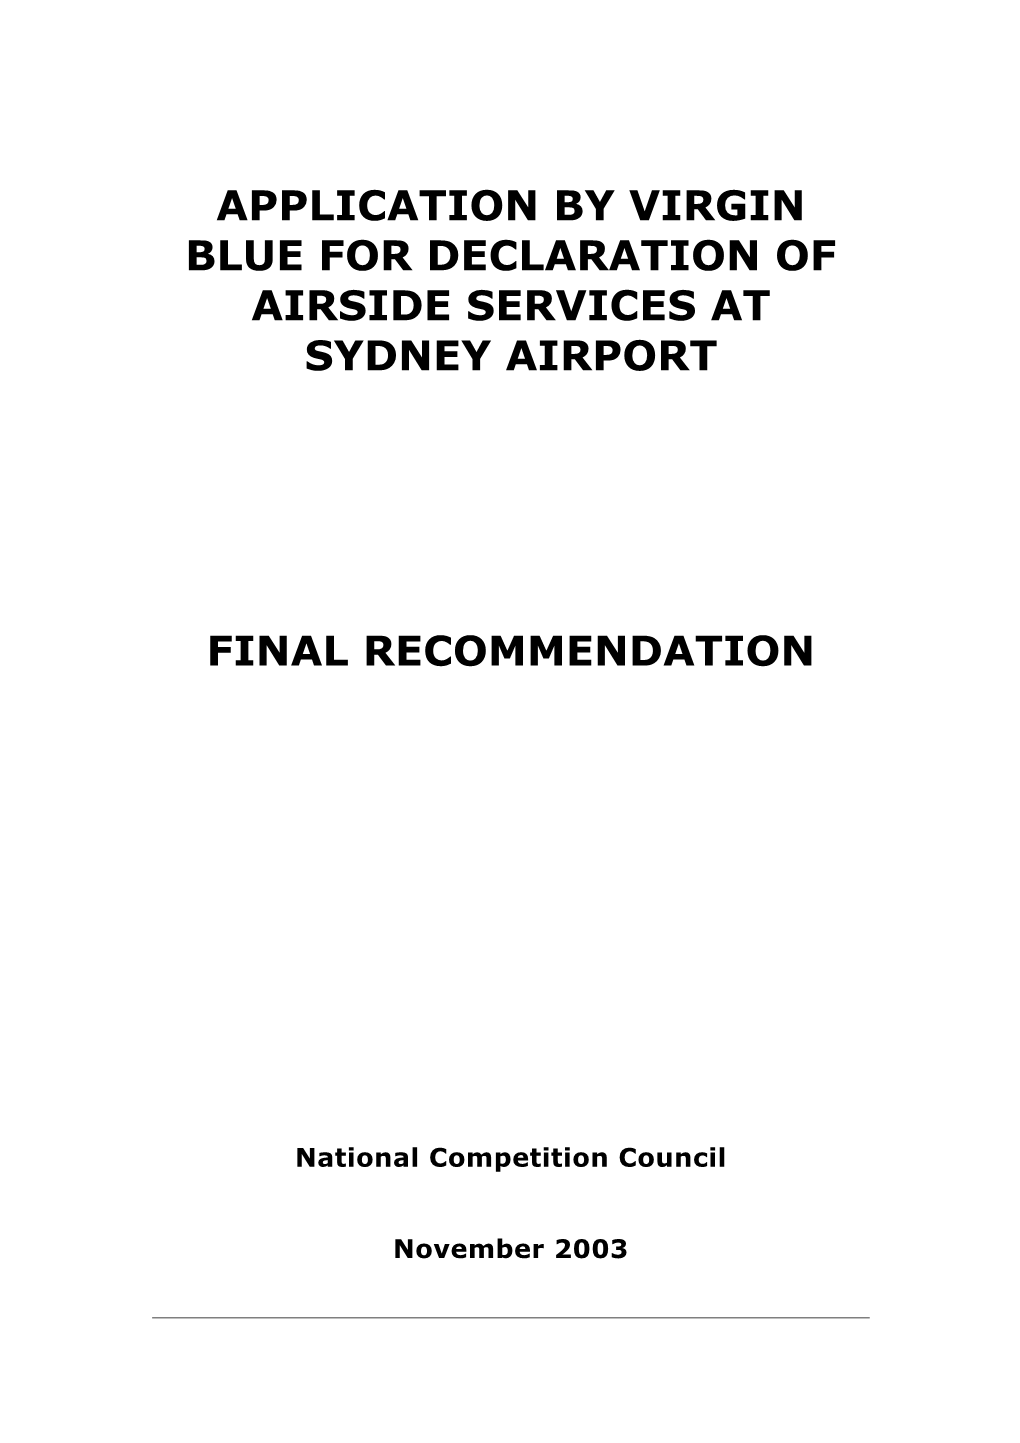 Application for Declaration of the Airside Services at Sydney Airport